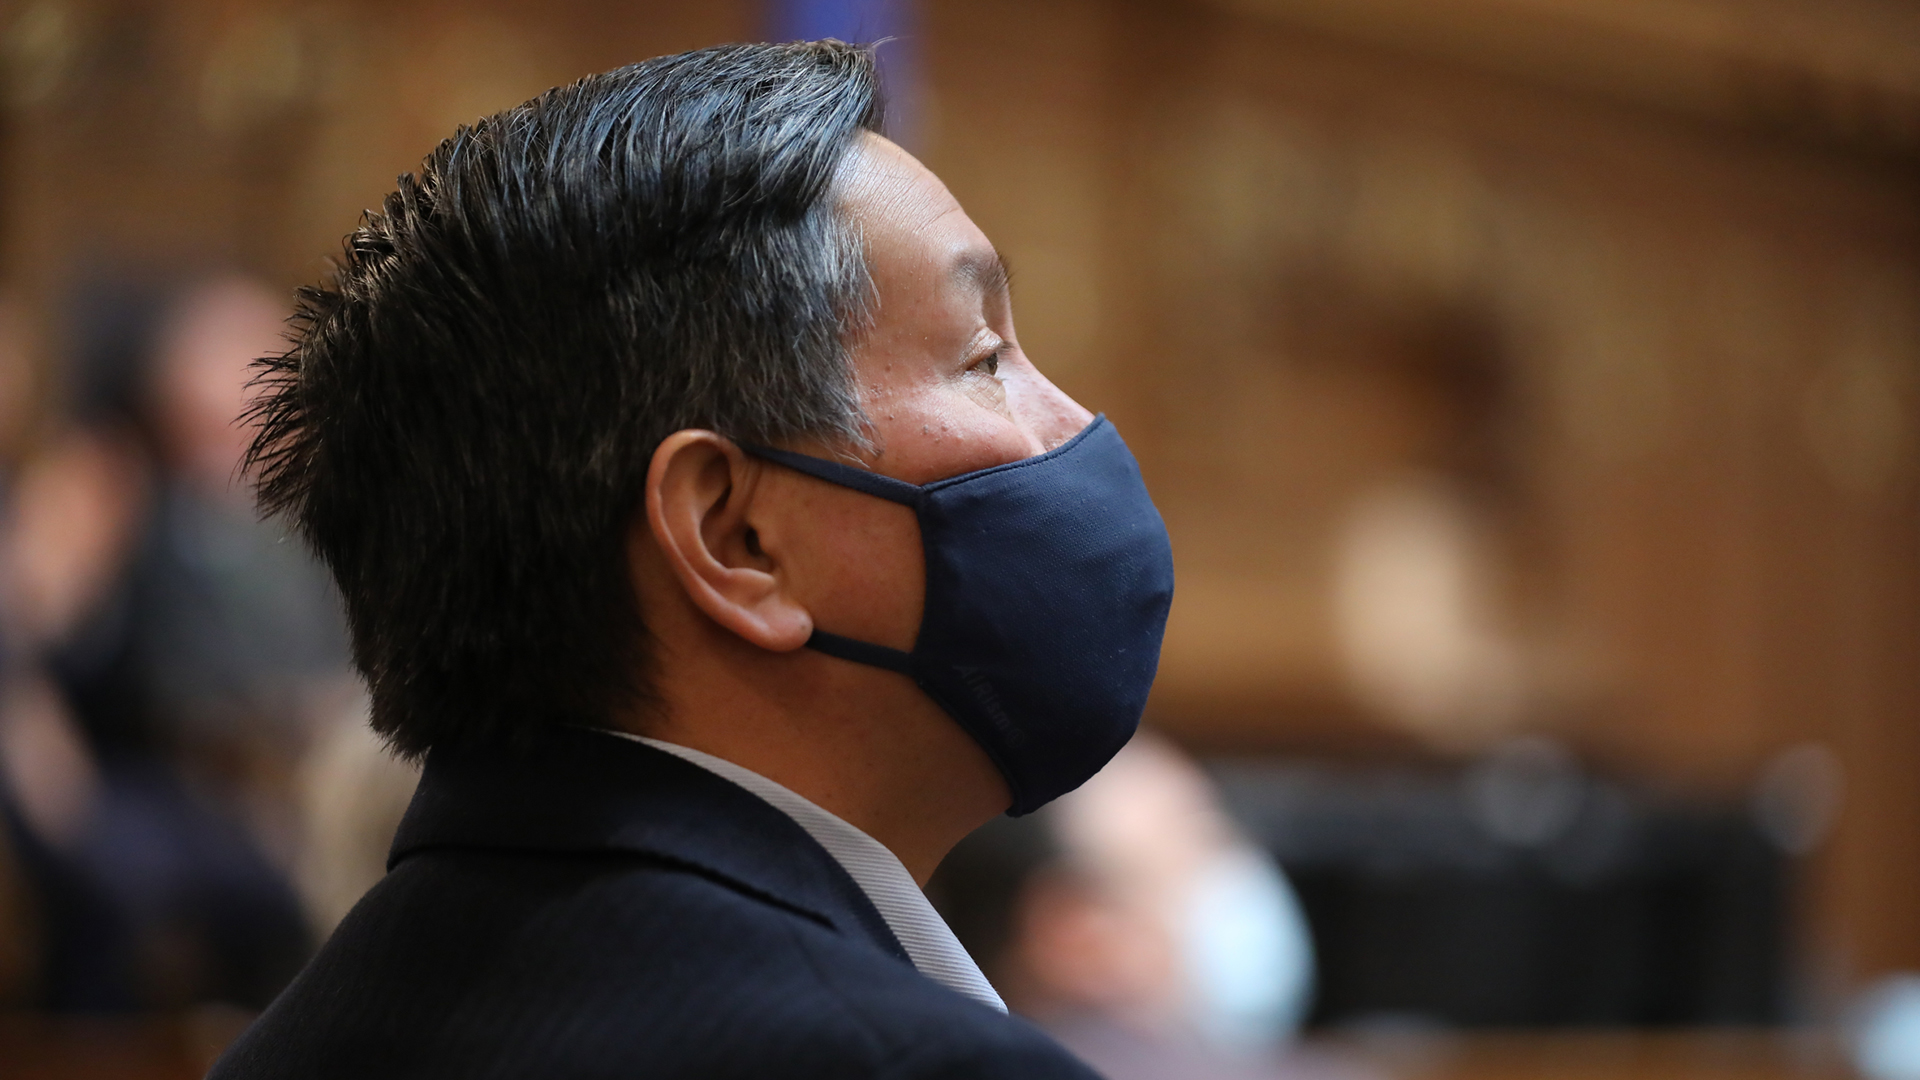 Marlon WhiteEagle wears a face mask while listening to a speaker in the Wisconsin Capitol.